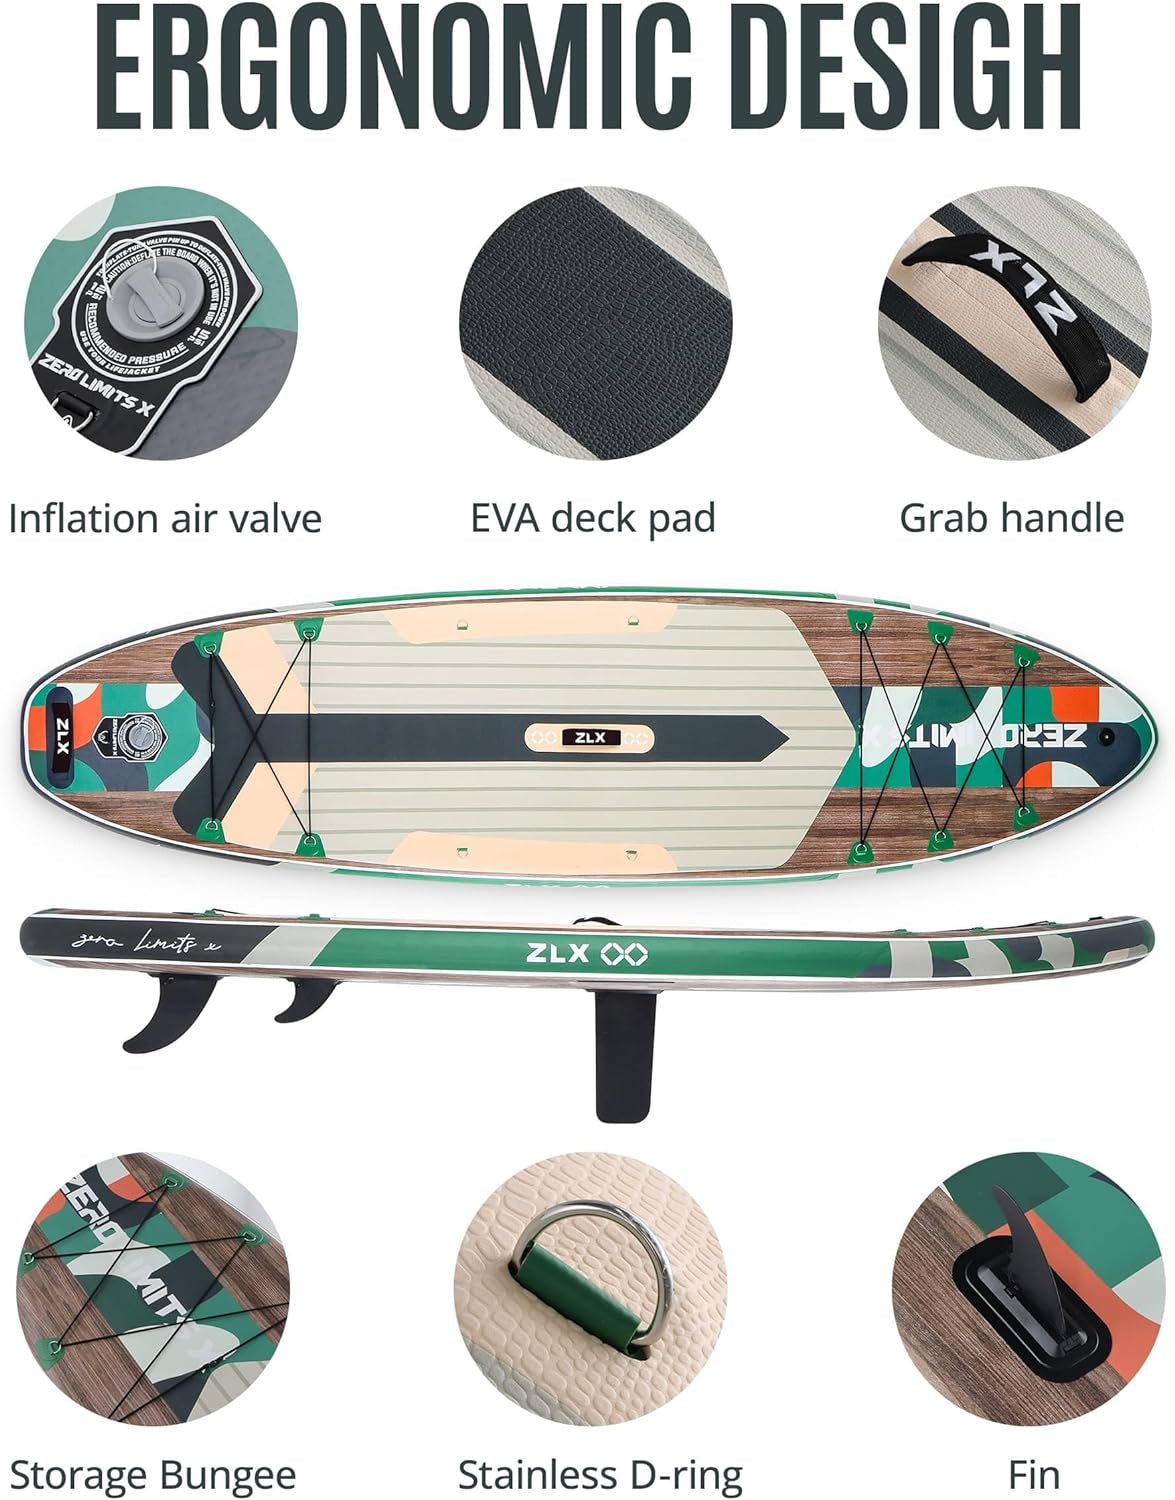 10.5 FT Inflatable Stand up Paddle Board with Accessories Premium SUP Board for All Skill Levels Youth & Adults Wide Stable Design Non-Slip Deck